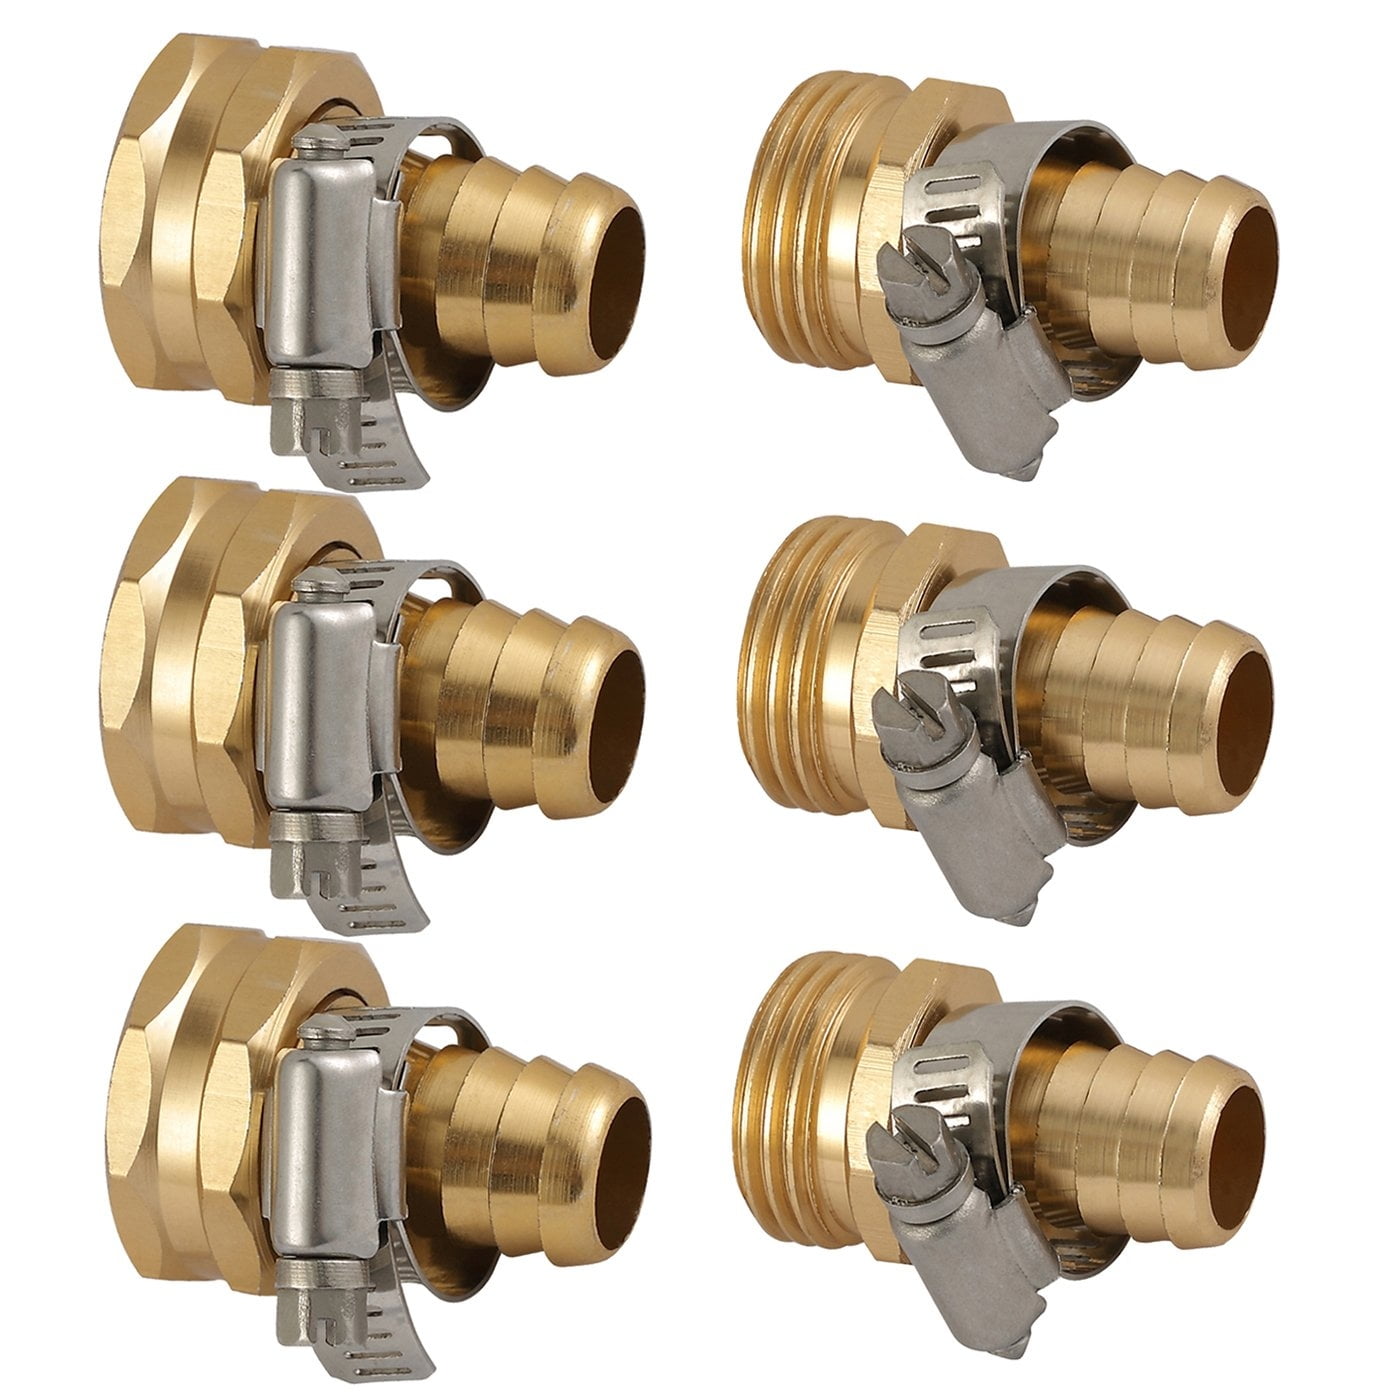 Details about   ZKZX Metal Garden Hose Repair Connector With Stainless Steel Clamp Female And 